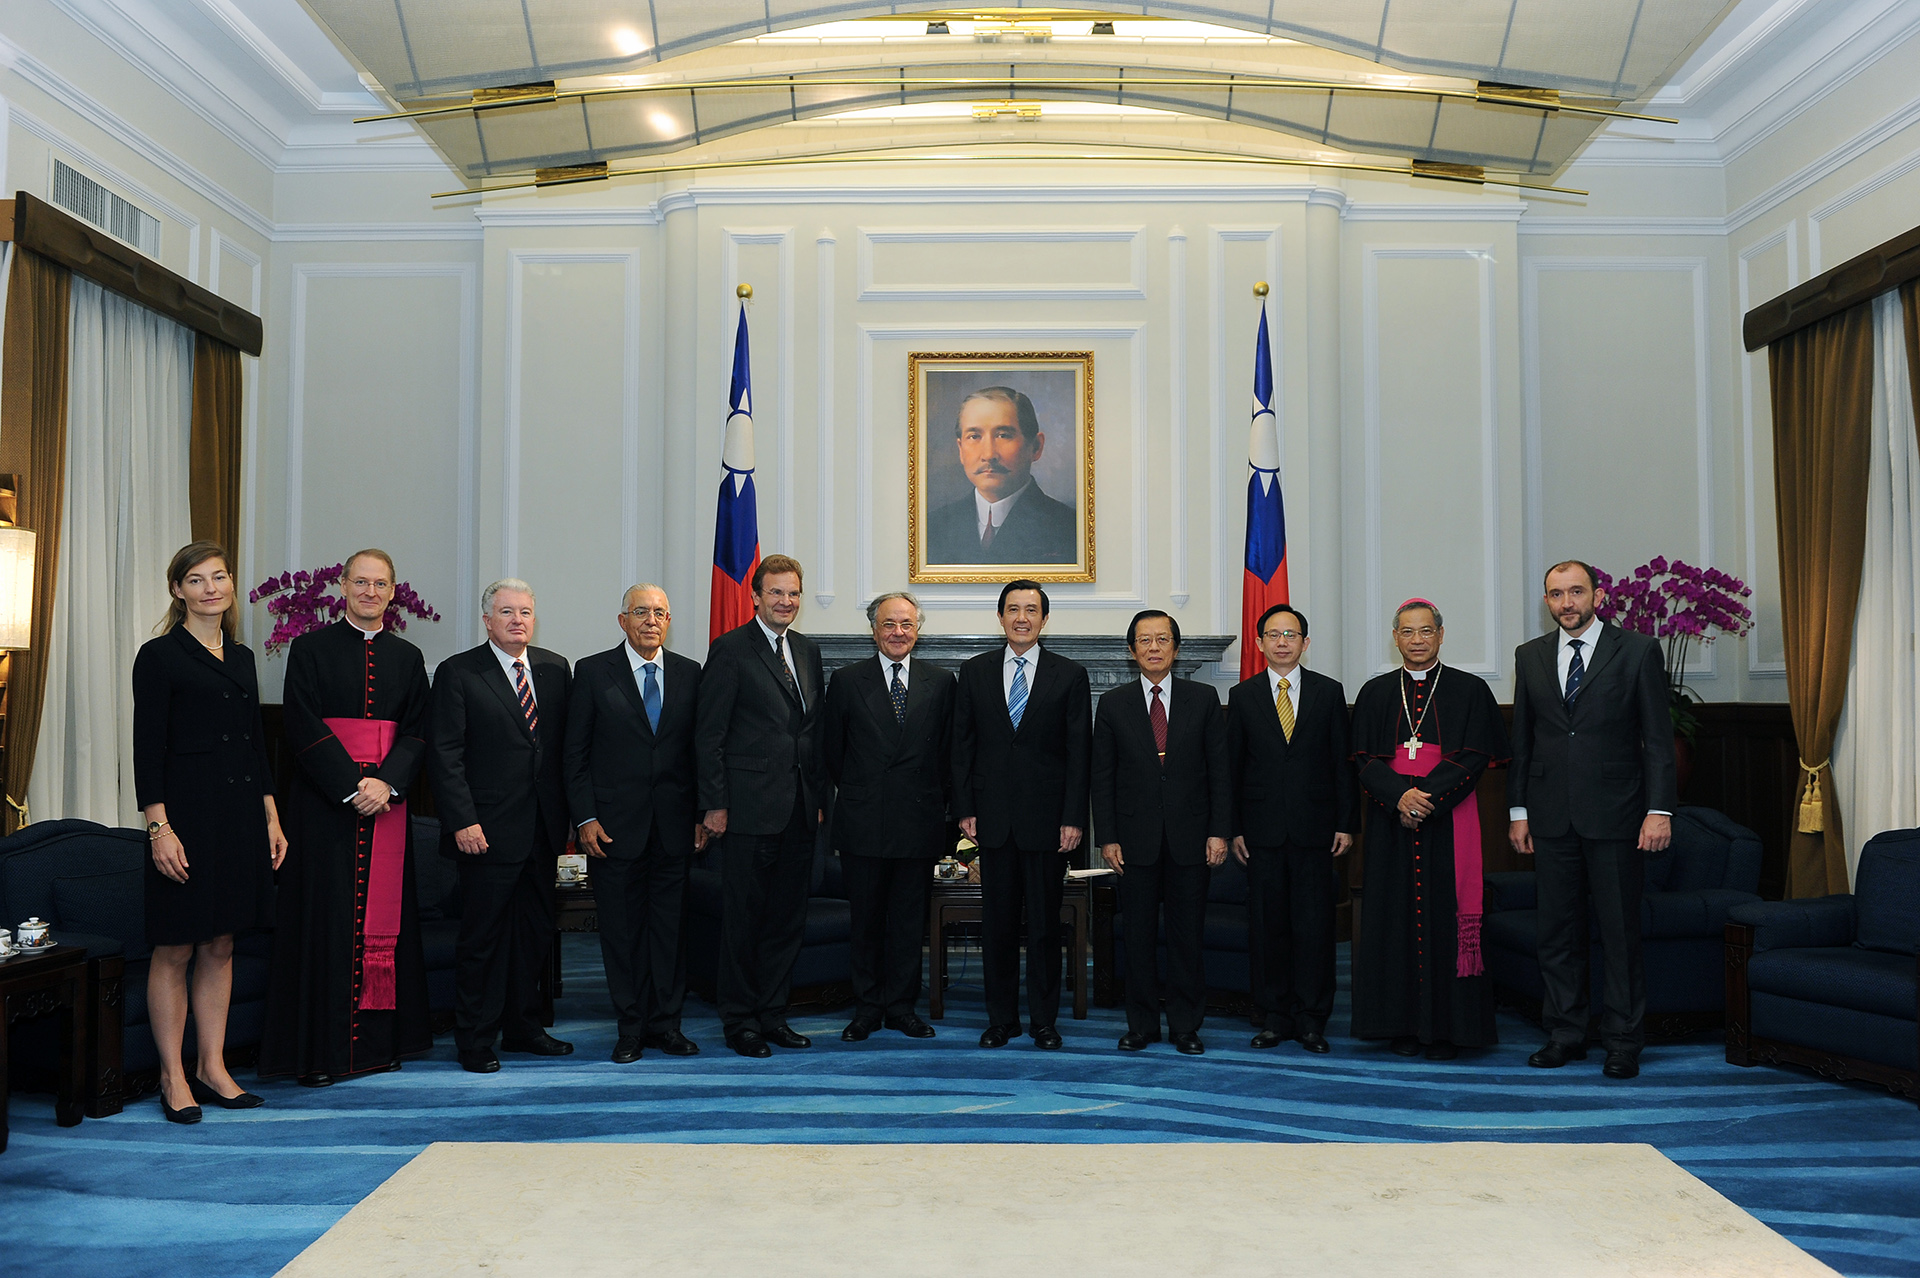 Jean-Pierre Mazery, Grand Chancellor of the Sovereign Order of Malta, visits the Republic of China (Taiwan)